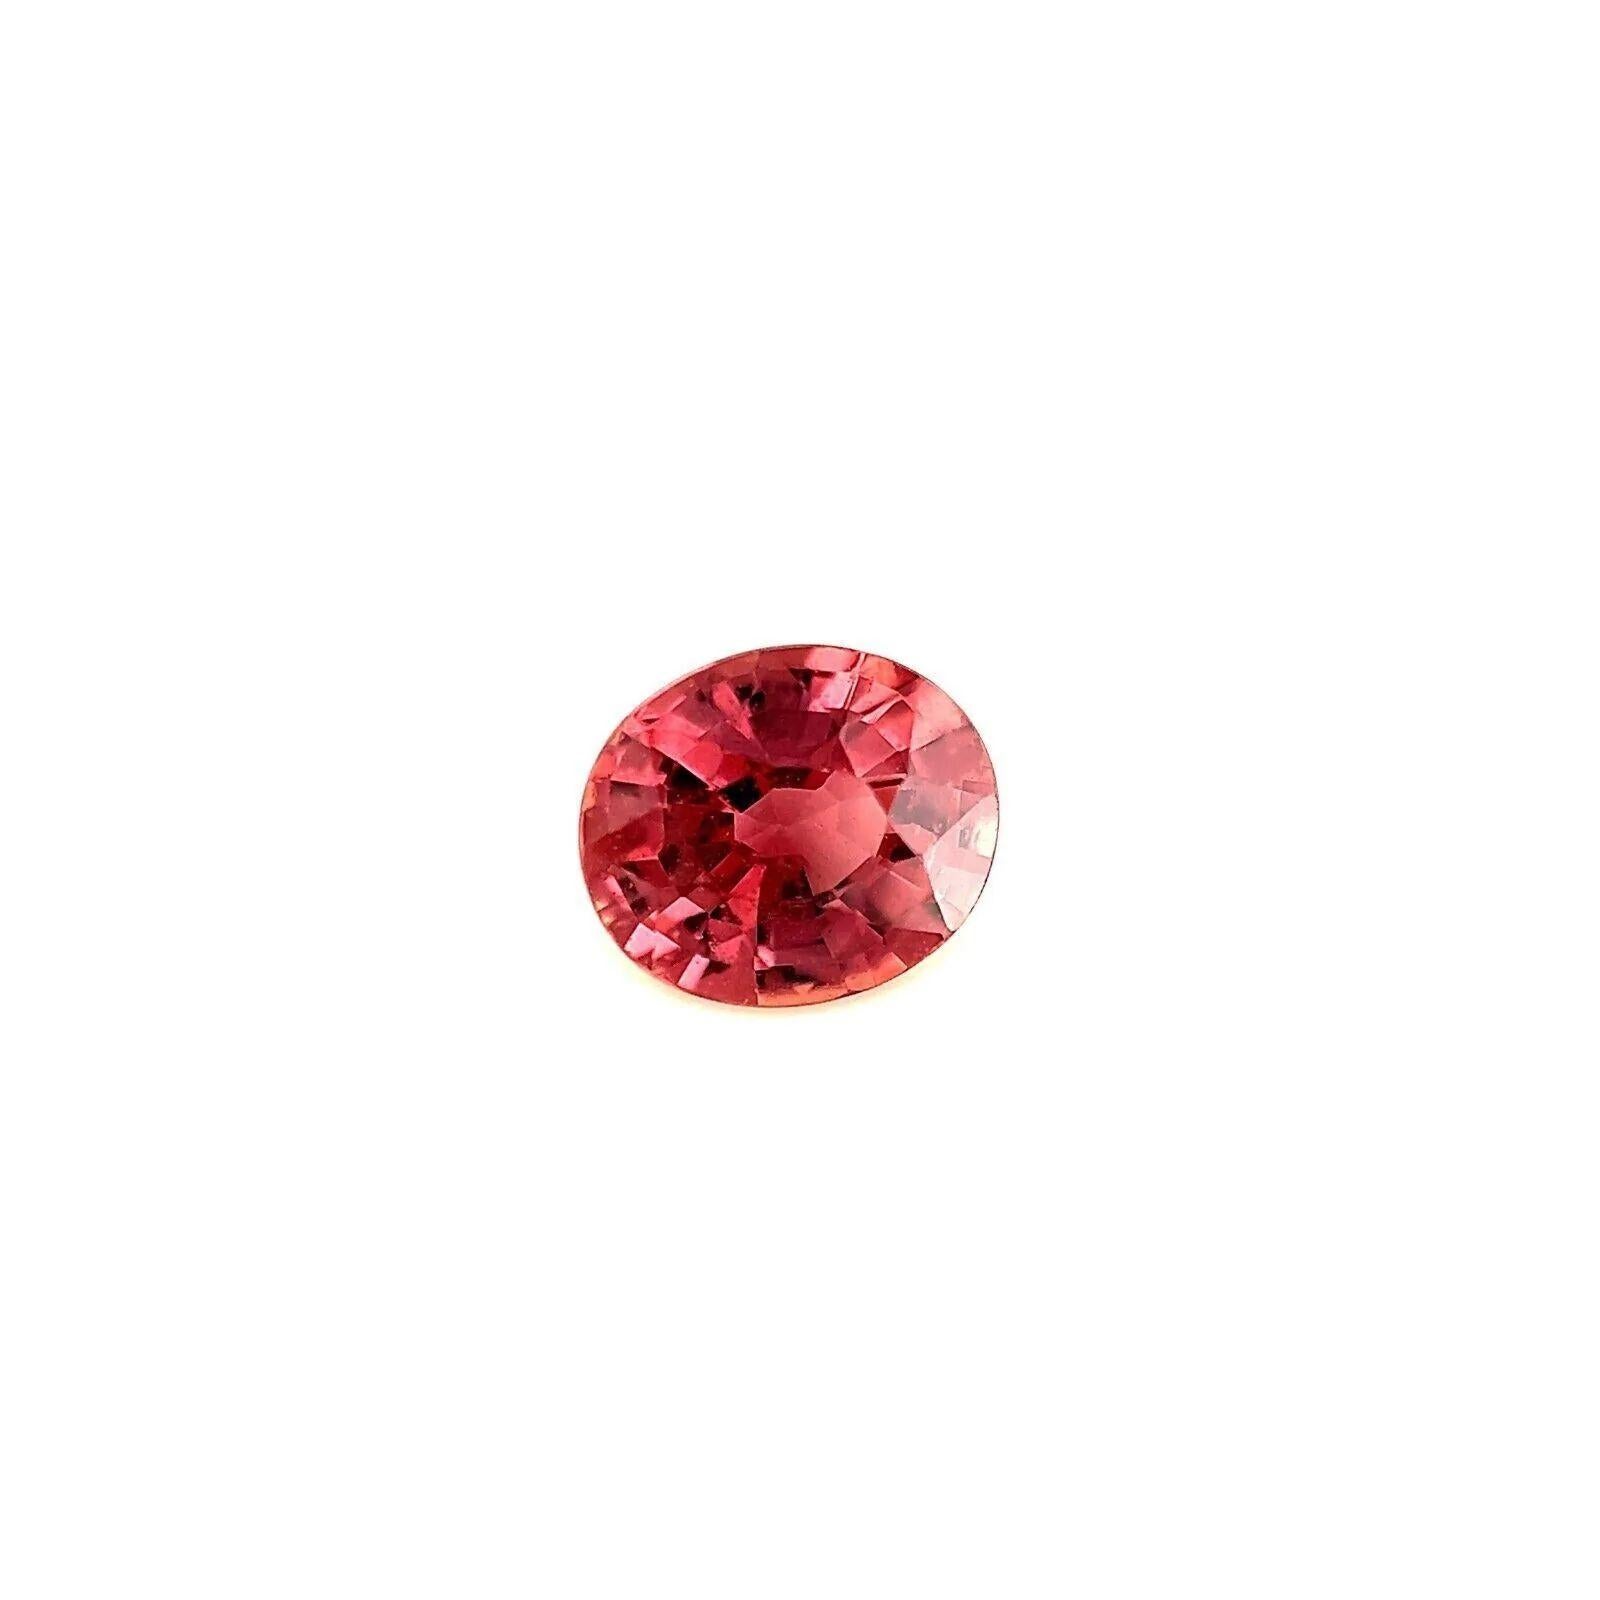 GIA Certified Unique Orange Pink Unheated Sapphire 0.75ct Oval Cut Gem No Heat

Unique Untreated Brownish Orangey Pink Sapphire Gemstone.
0.75 Carat with good clarity, a clean stone with only some small natural inclusions visible when looking